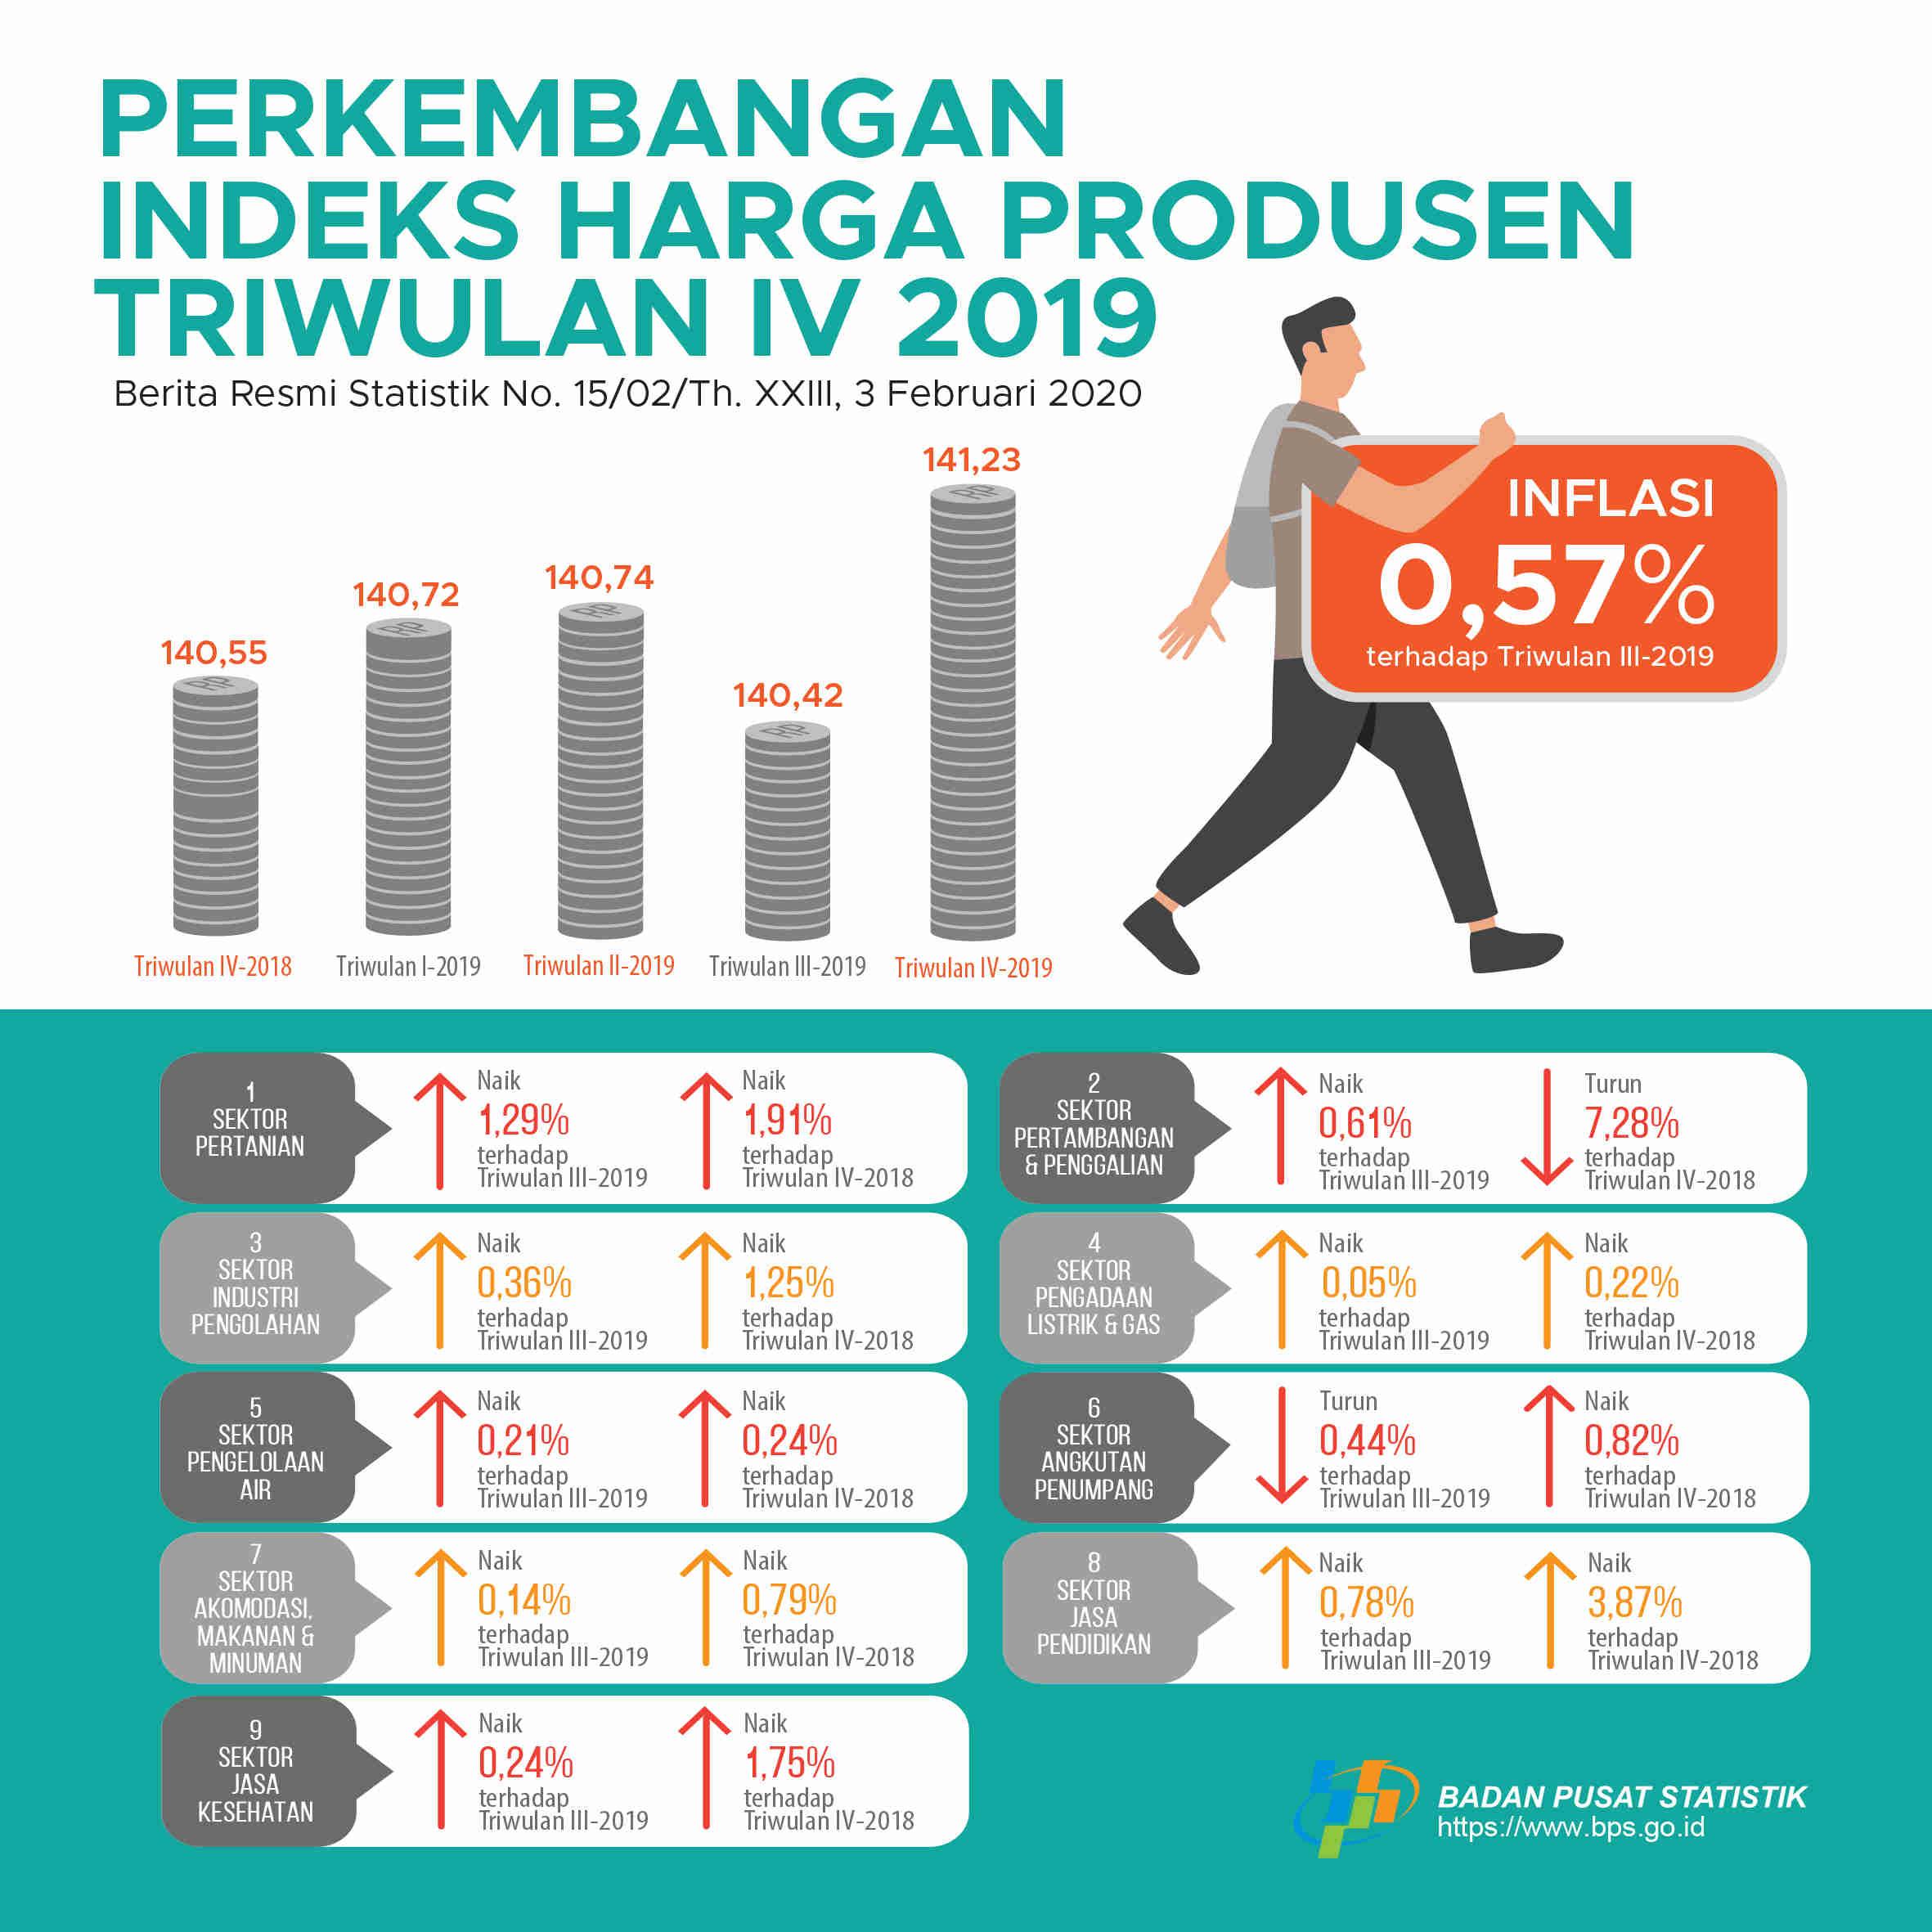 Producer Price Index Quarter IV 2019 Experiencing Inflation of 0.57 Percent